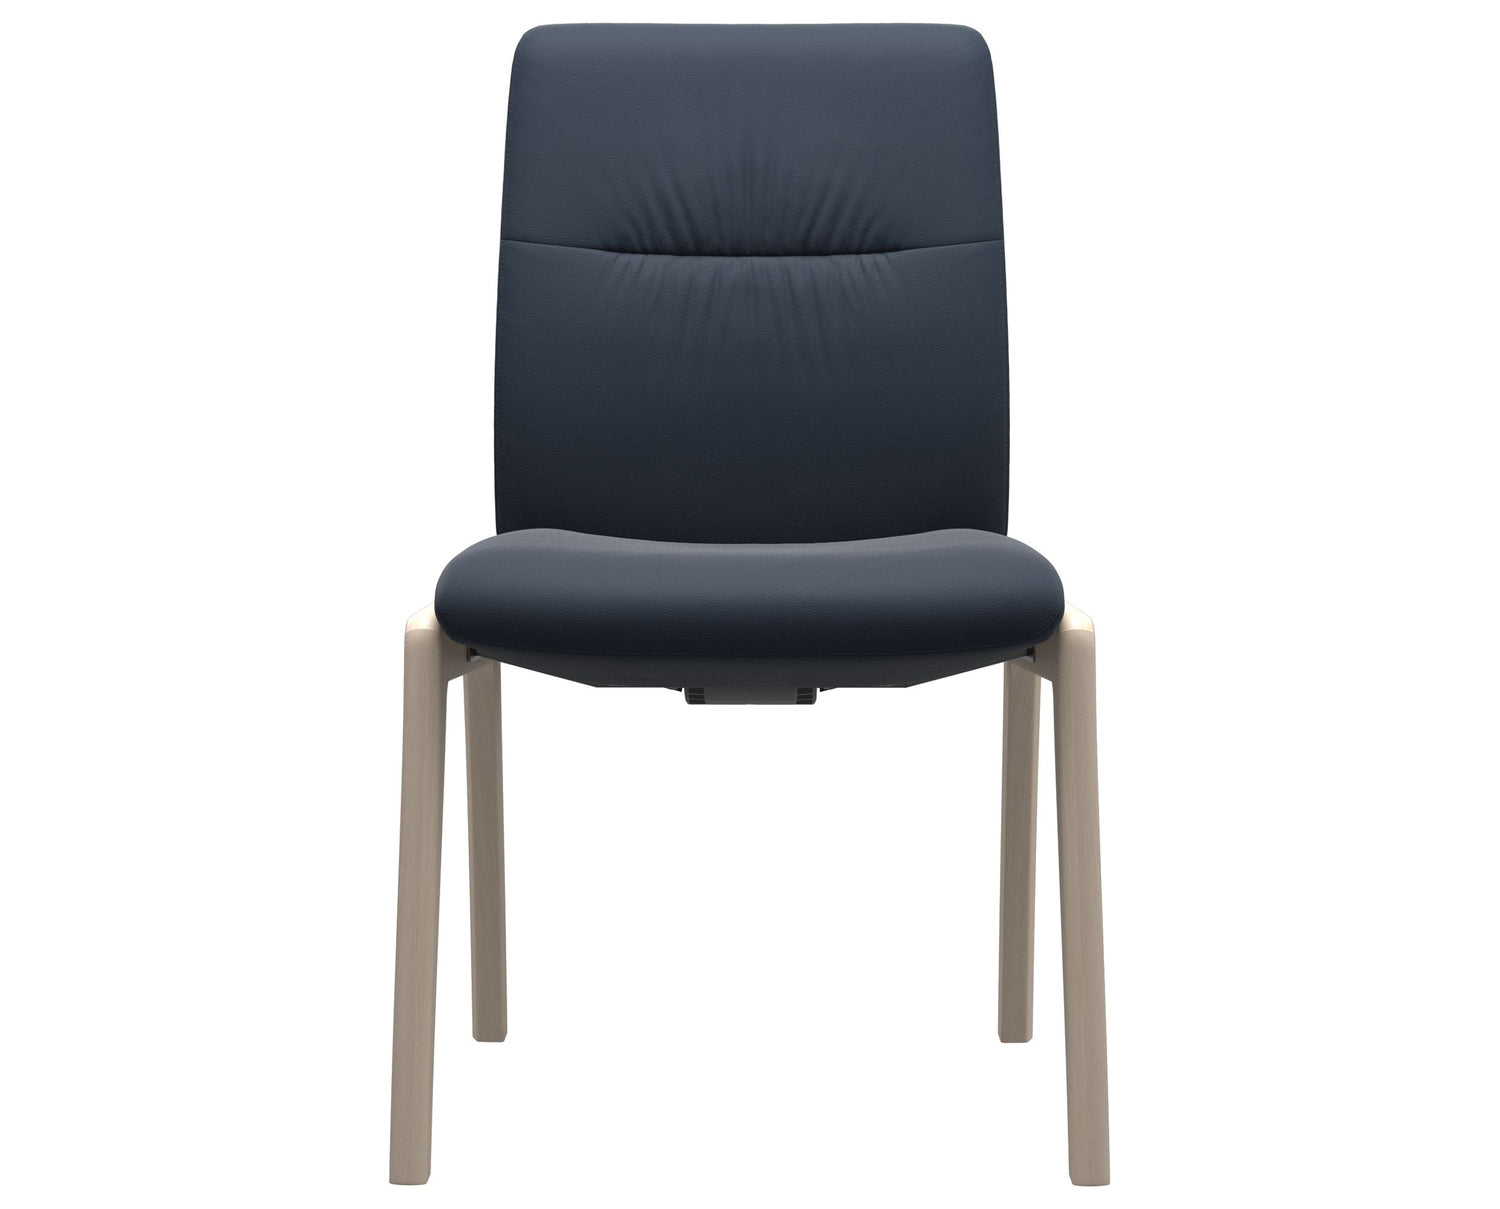 Paloma Leather Oxford Blue & Whitewash Base | Stressless Mint Low Back D100 Dining Chair | Valley Ridge Furniture